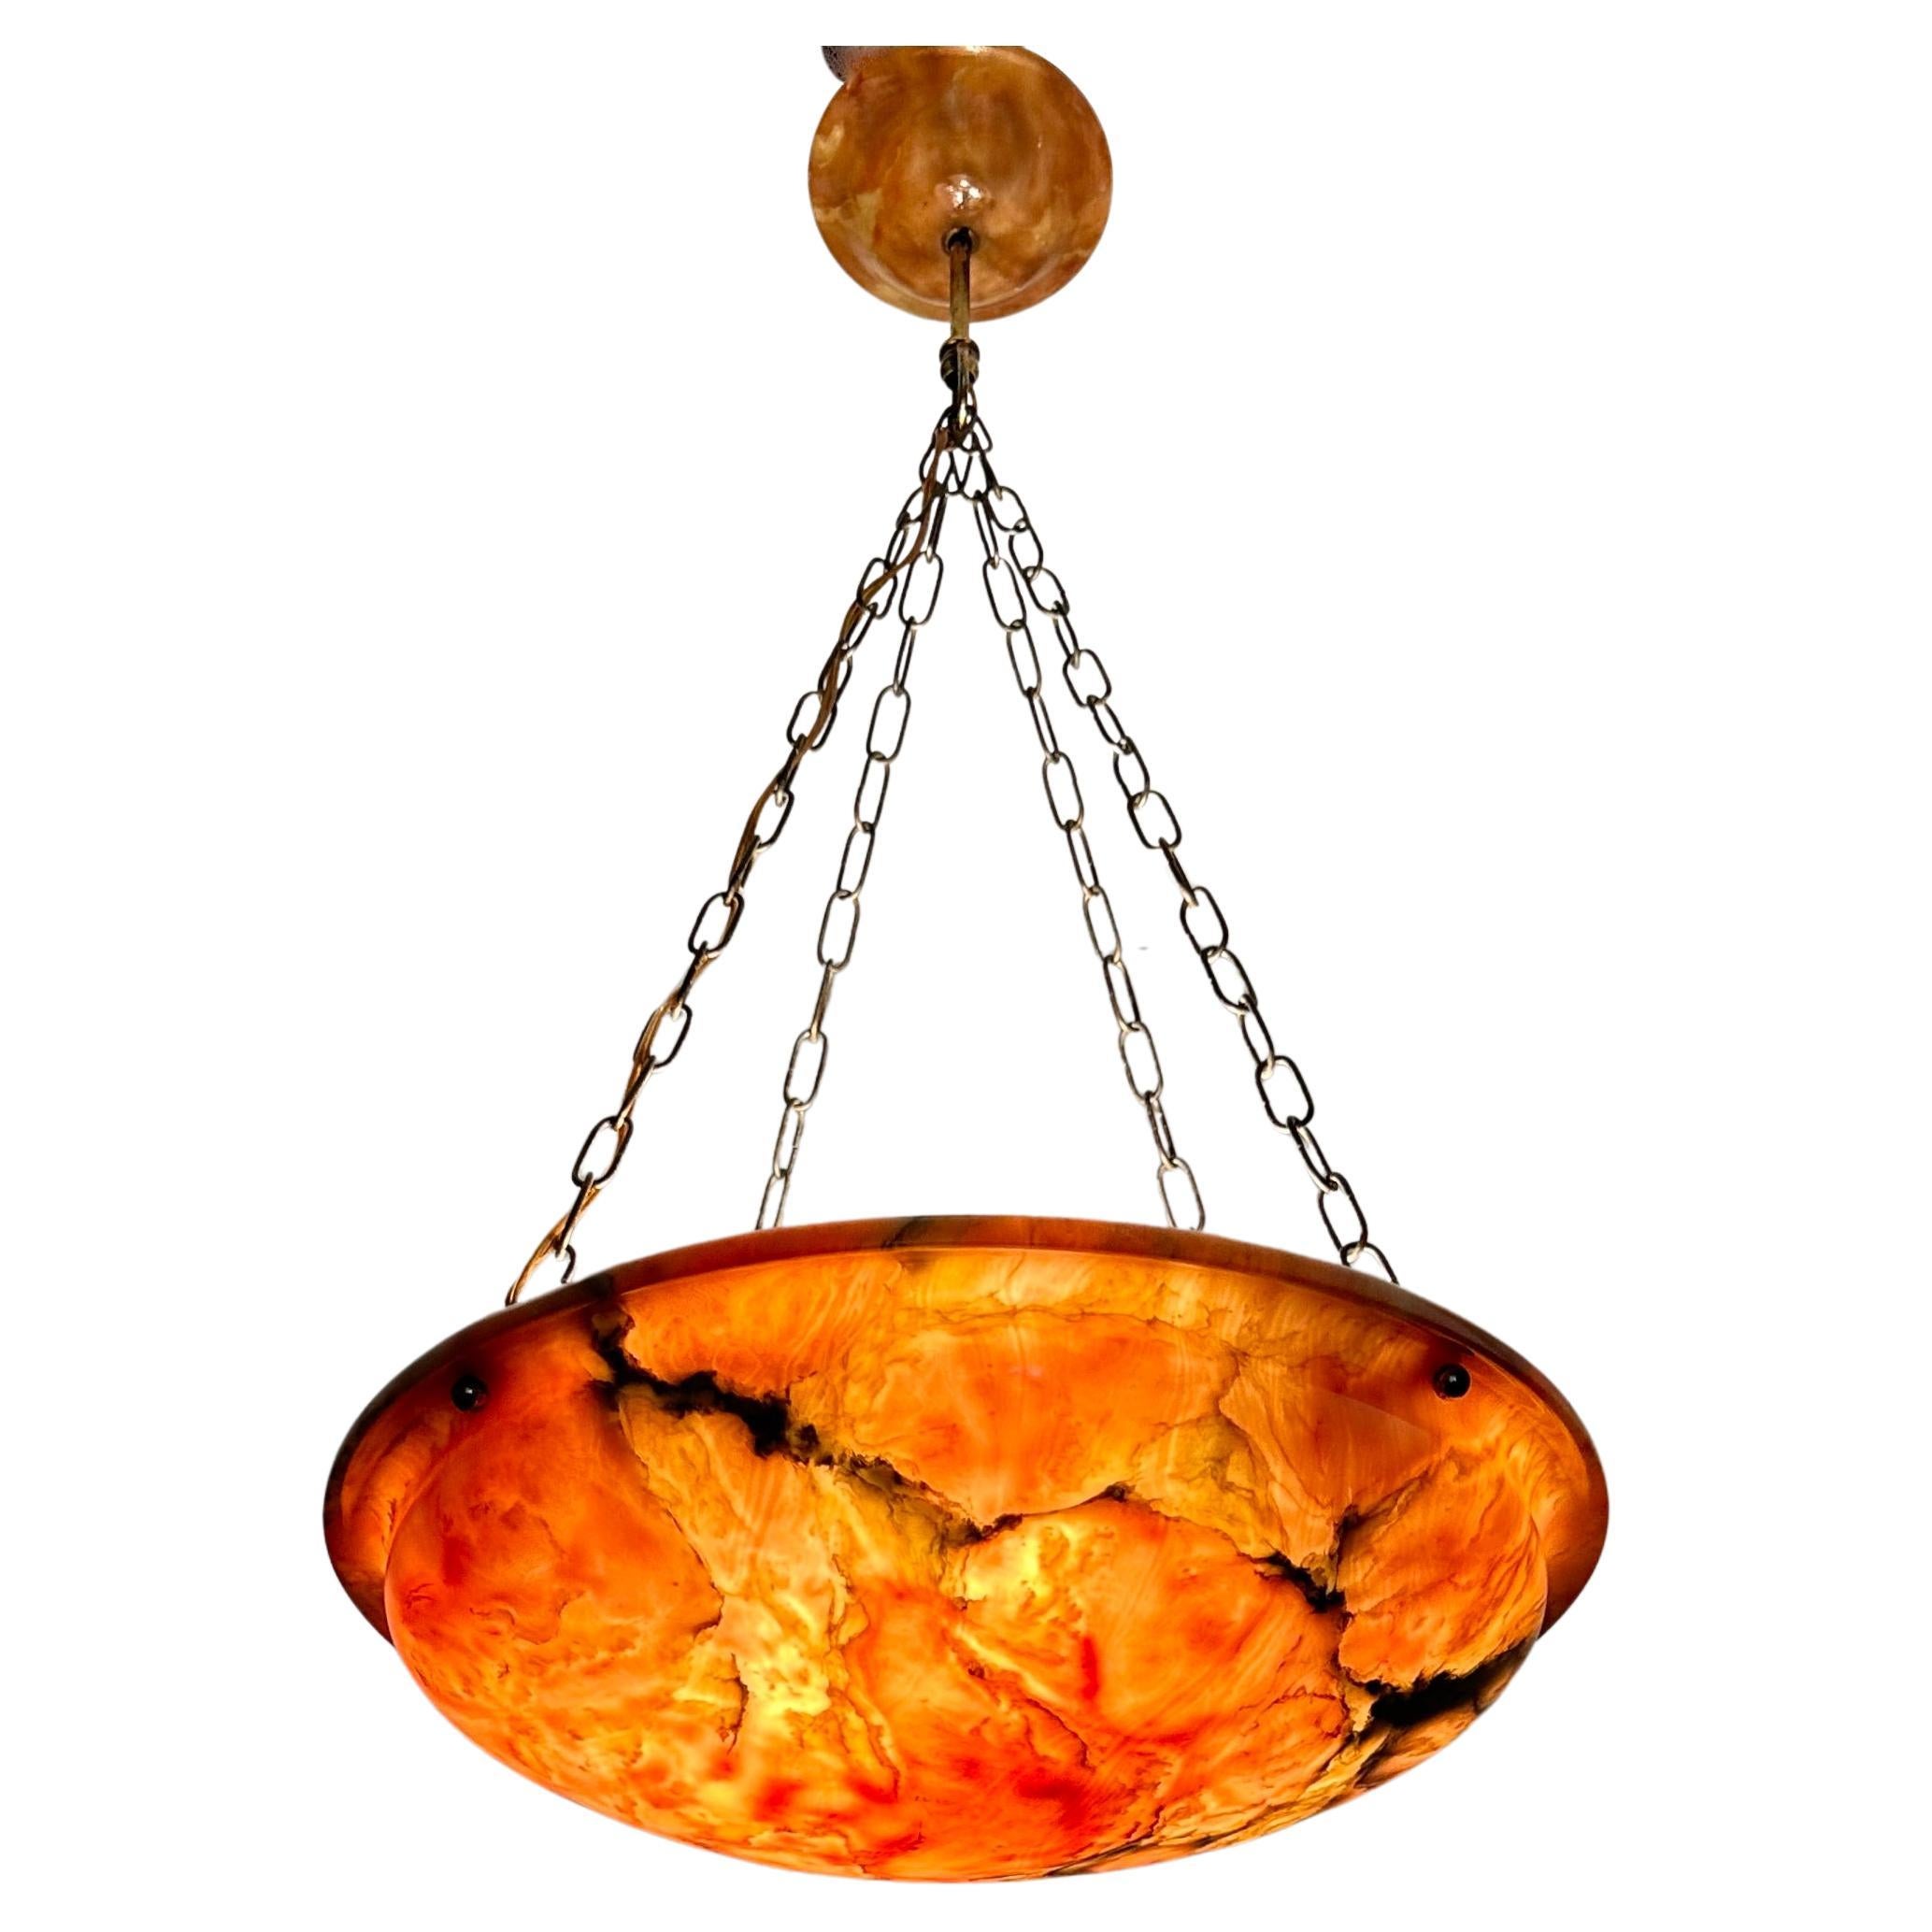 Stunning 4-light alabaster shade with firelight colors when switched on.

This light fixture is another one of our recent great finds and with the stylish chain and matching alabaster canopy it is another great fixture to enjoy and look at. The